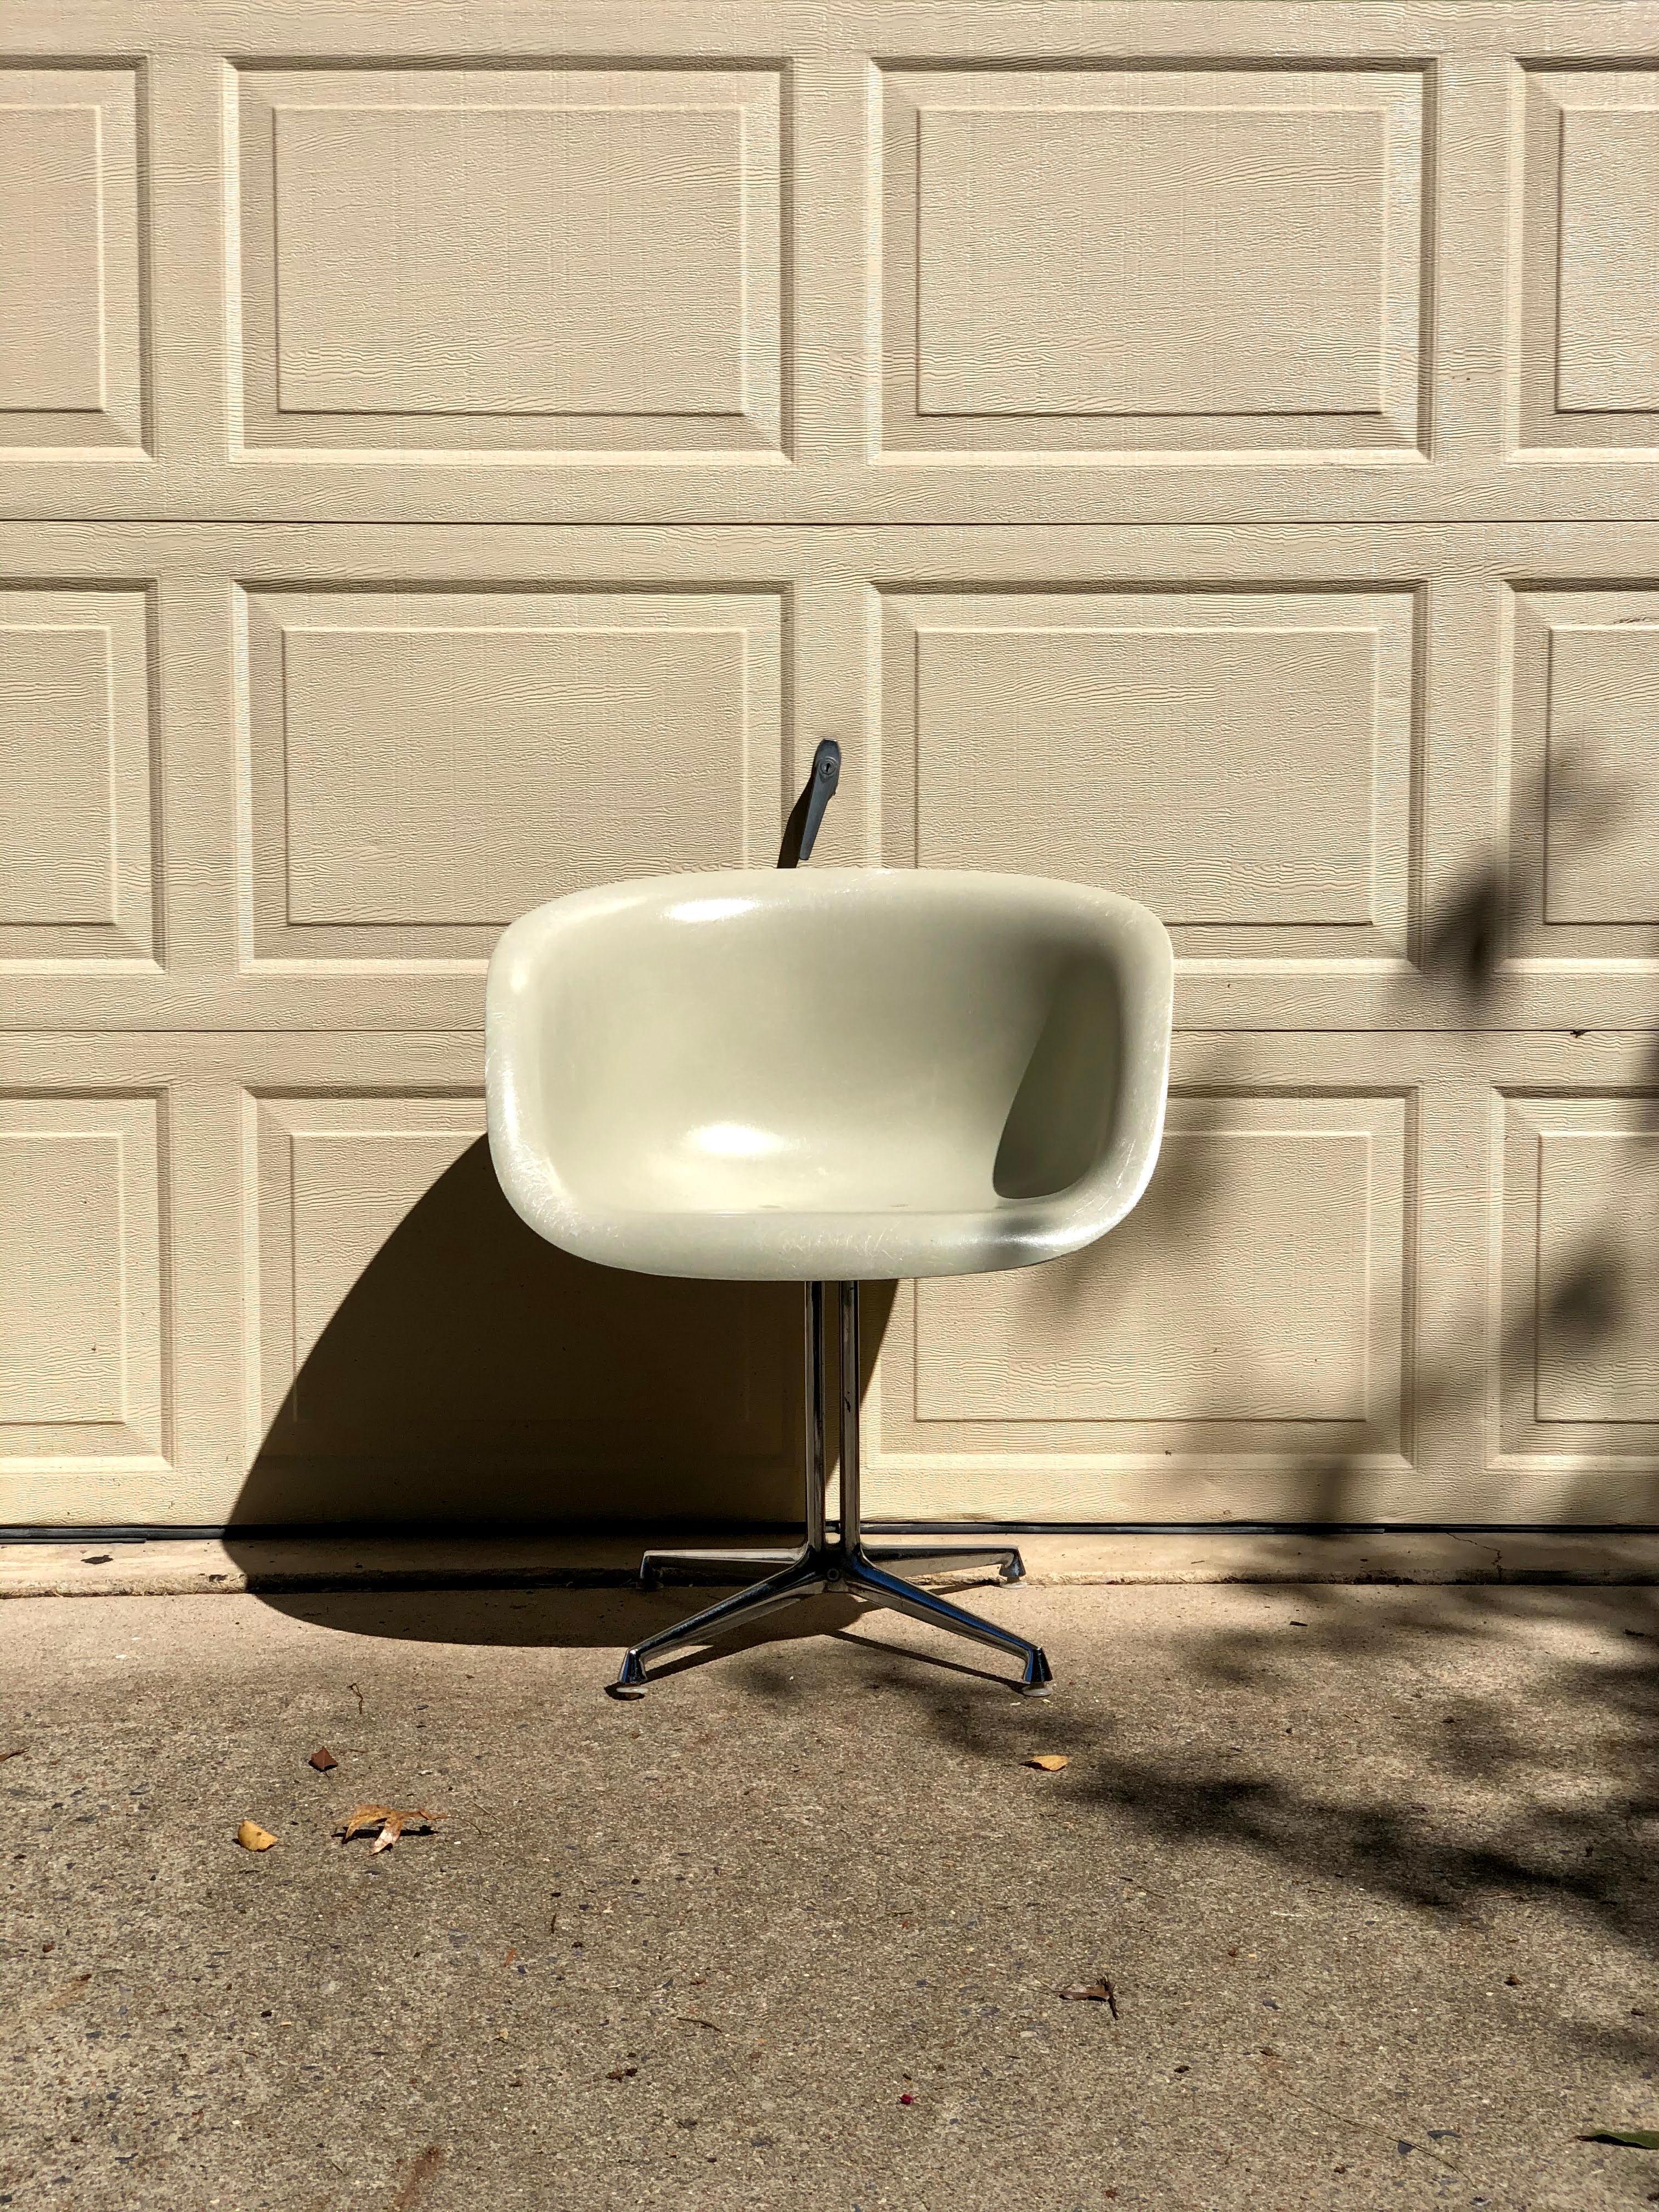 This arm chair is one of two new fiberglass chairs Charles and Ray Eames designed in 1961, inspired by request from Alexander Girard, who needed seating for his new Manhattan restaurant, La Fonda Del Sol. Some collectors call these “La Fonda” chairs